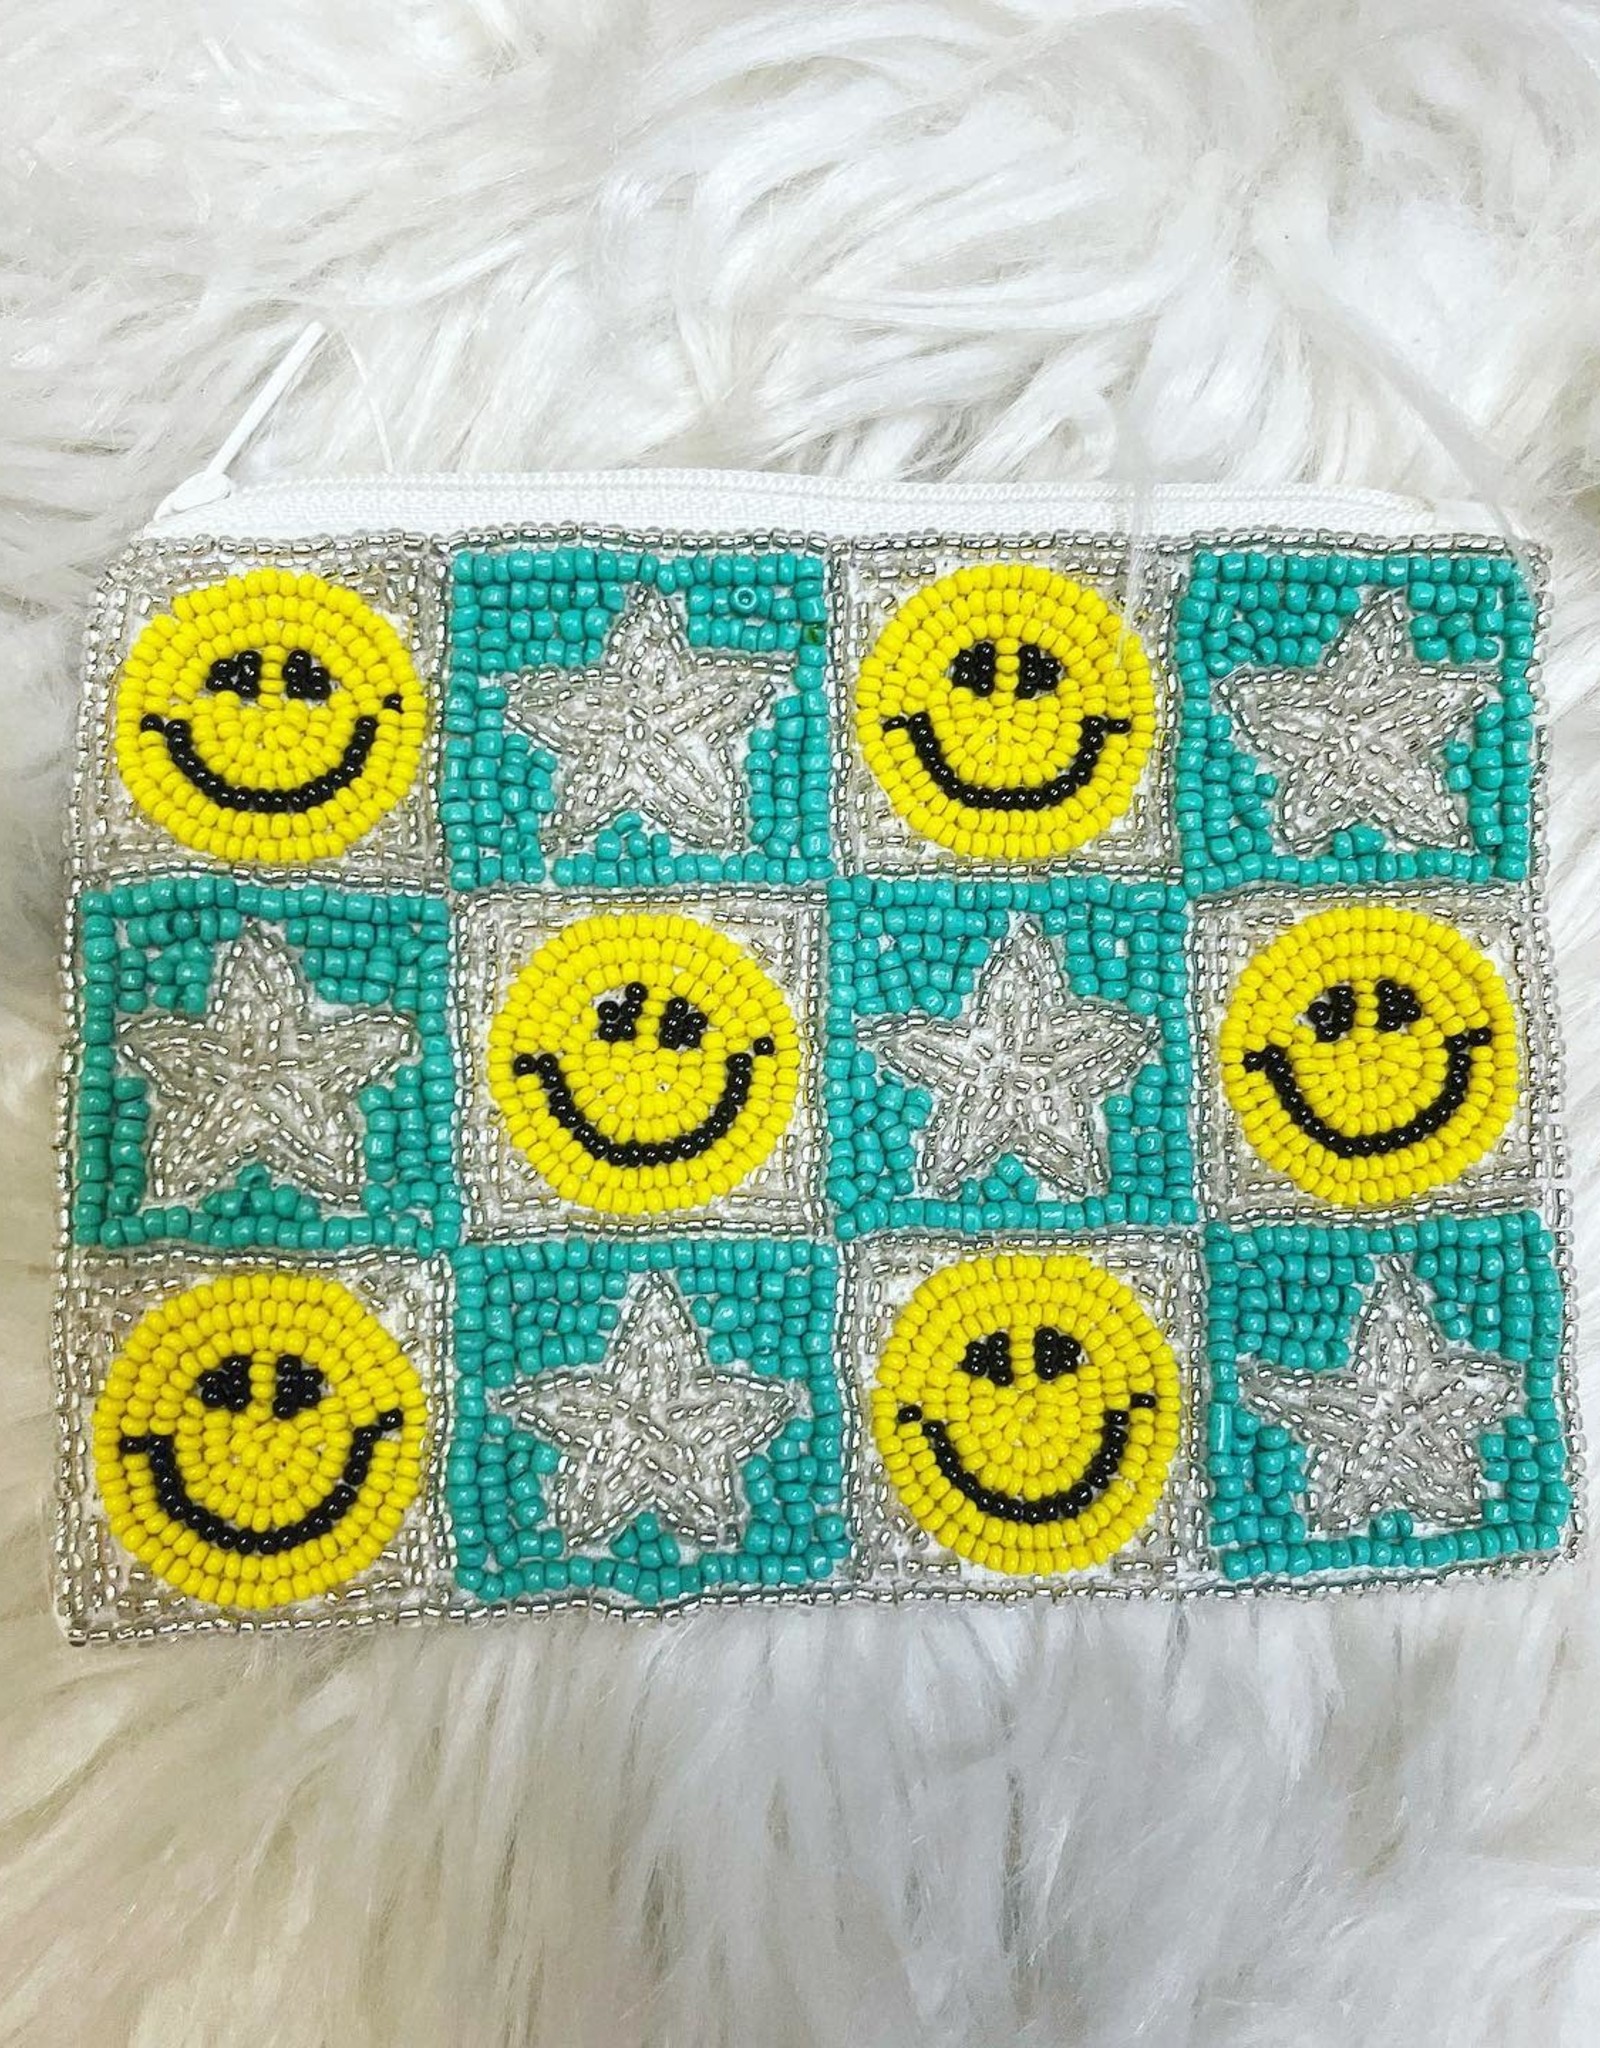 Turquoise Smile Star Zipper Pouch